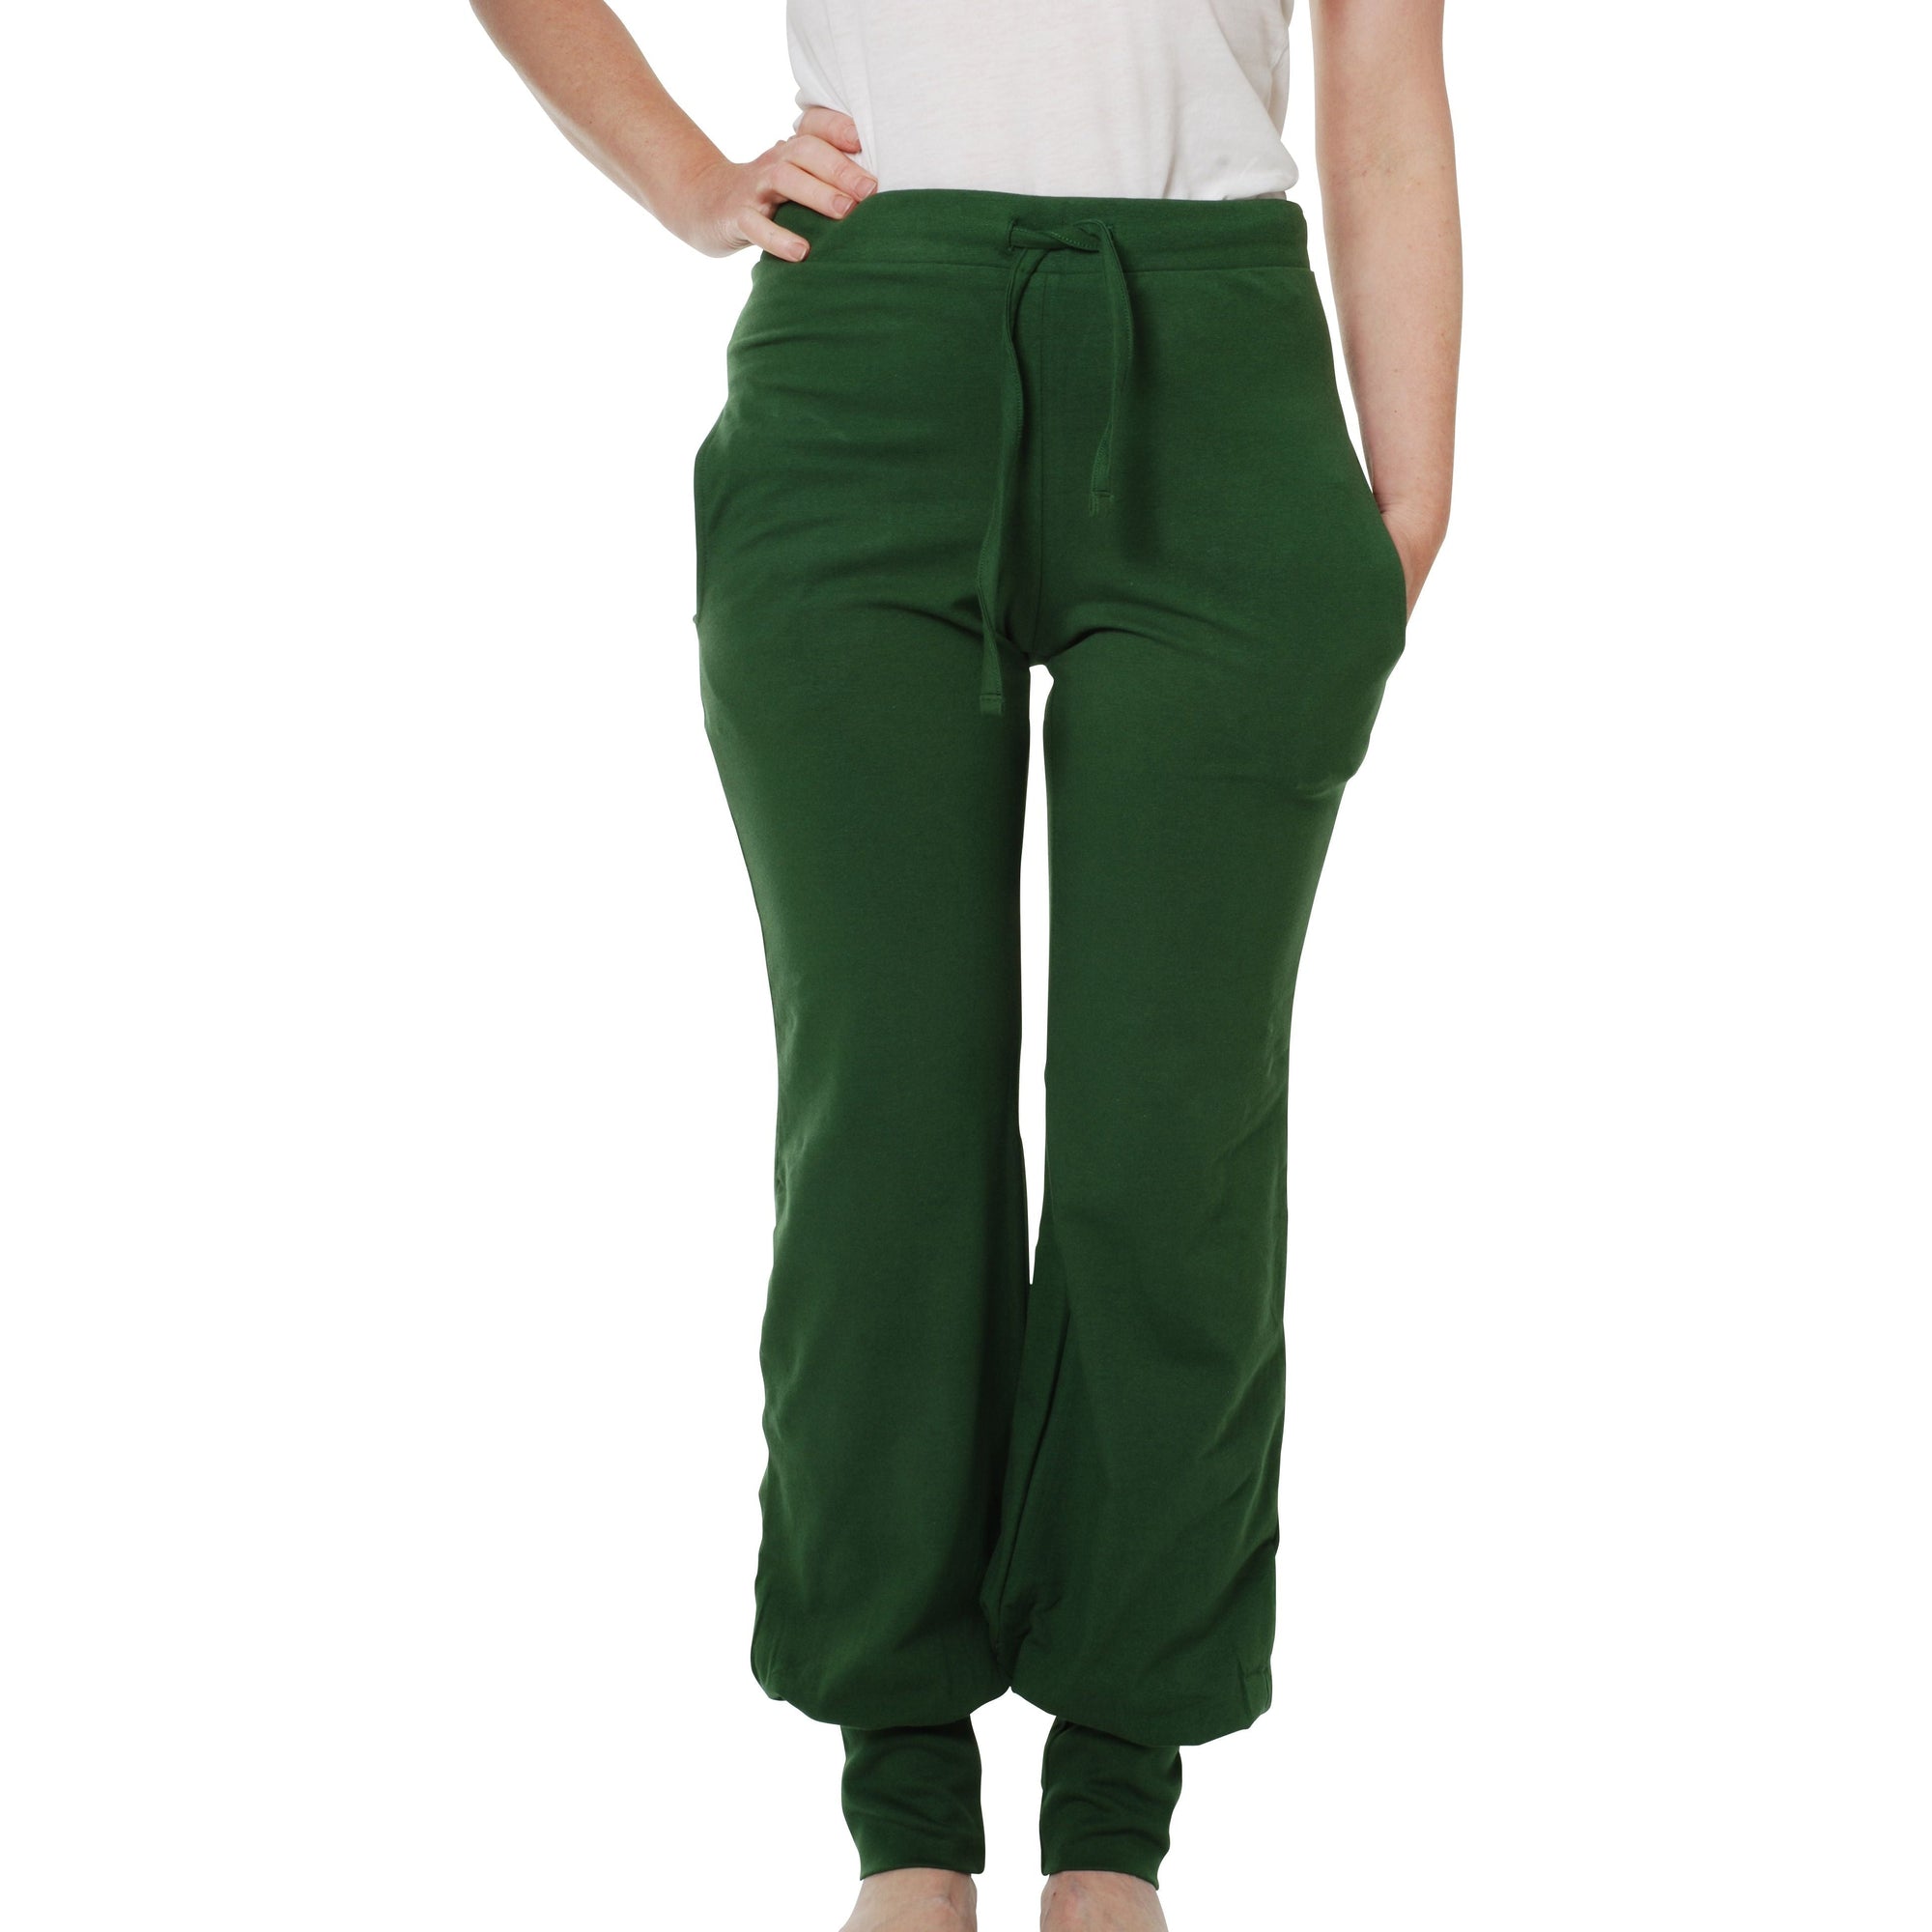 Adult's Greener Pastures Baggy Pants - 2 Left Size L & XL-More Than A Fling-Modern Rascals